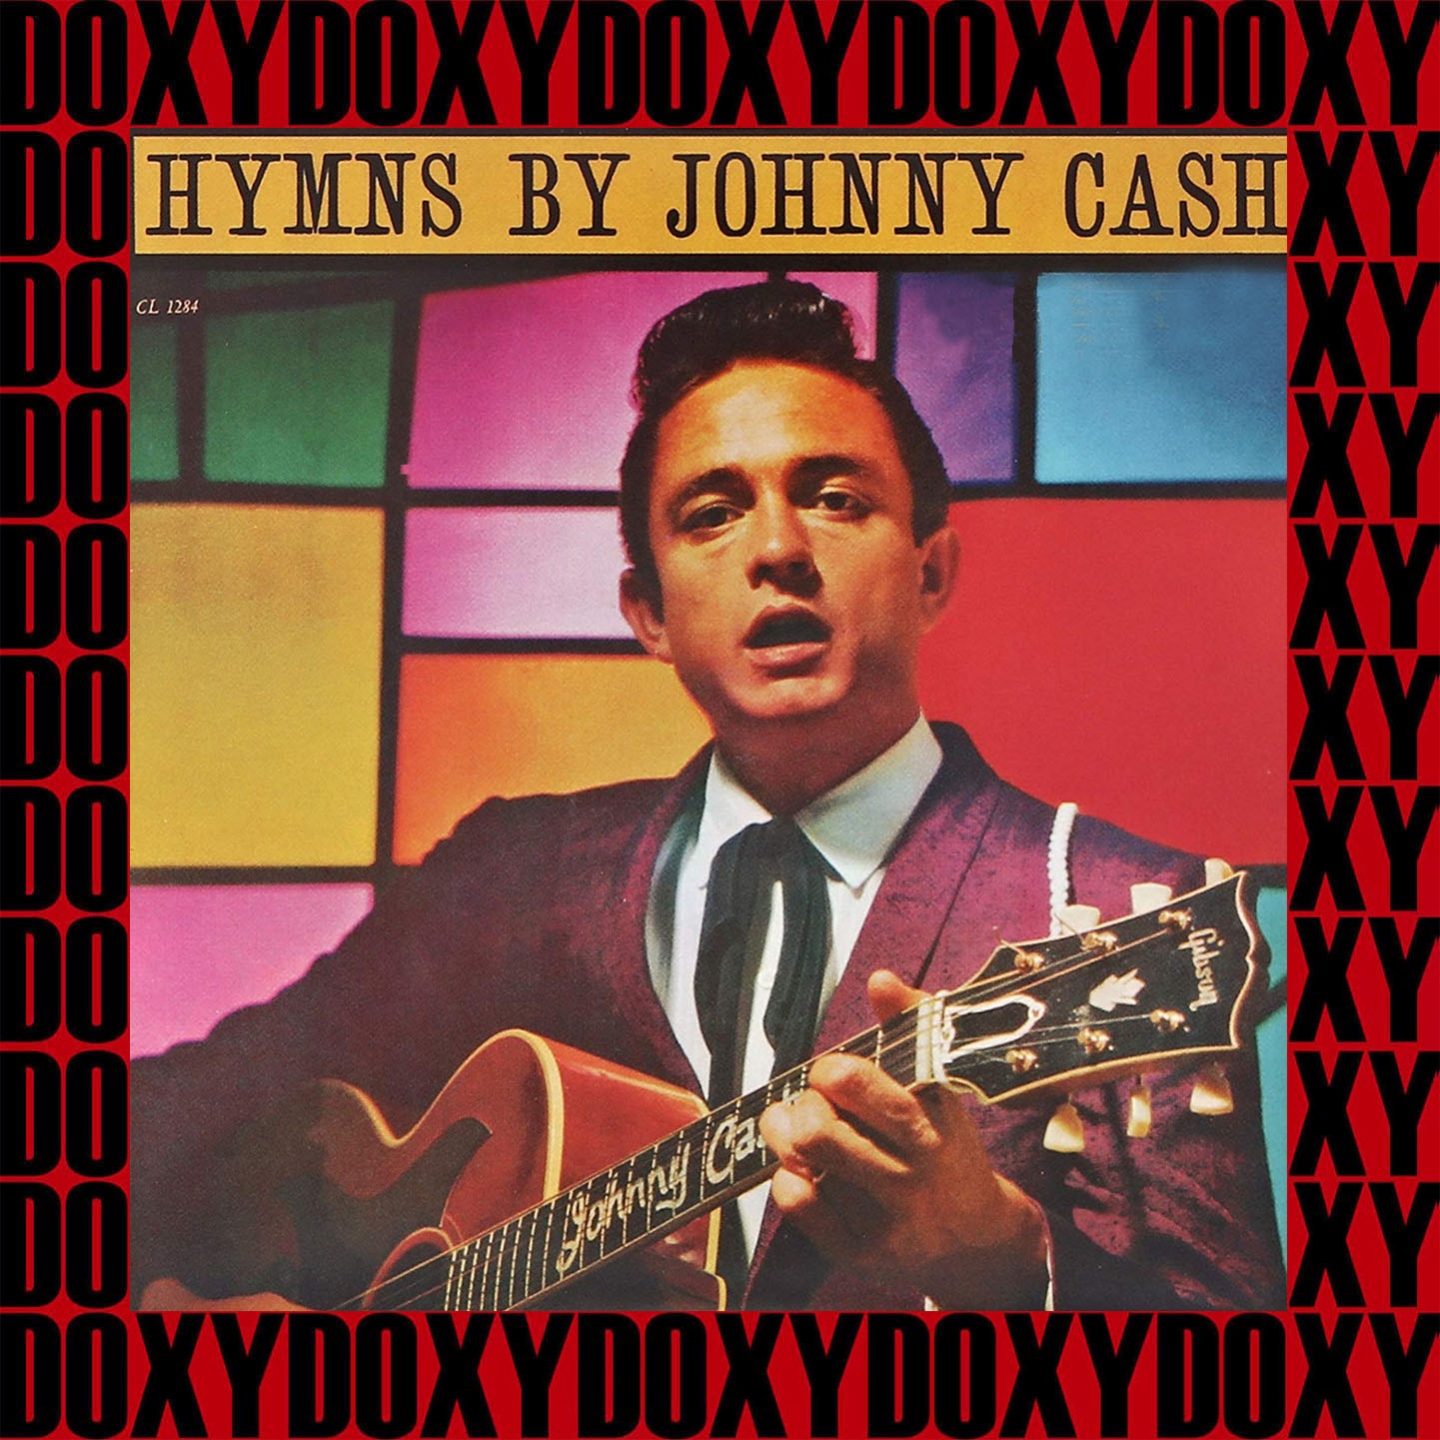 Hymns by JC (Remastered Version) (Doxy Collection)